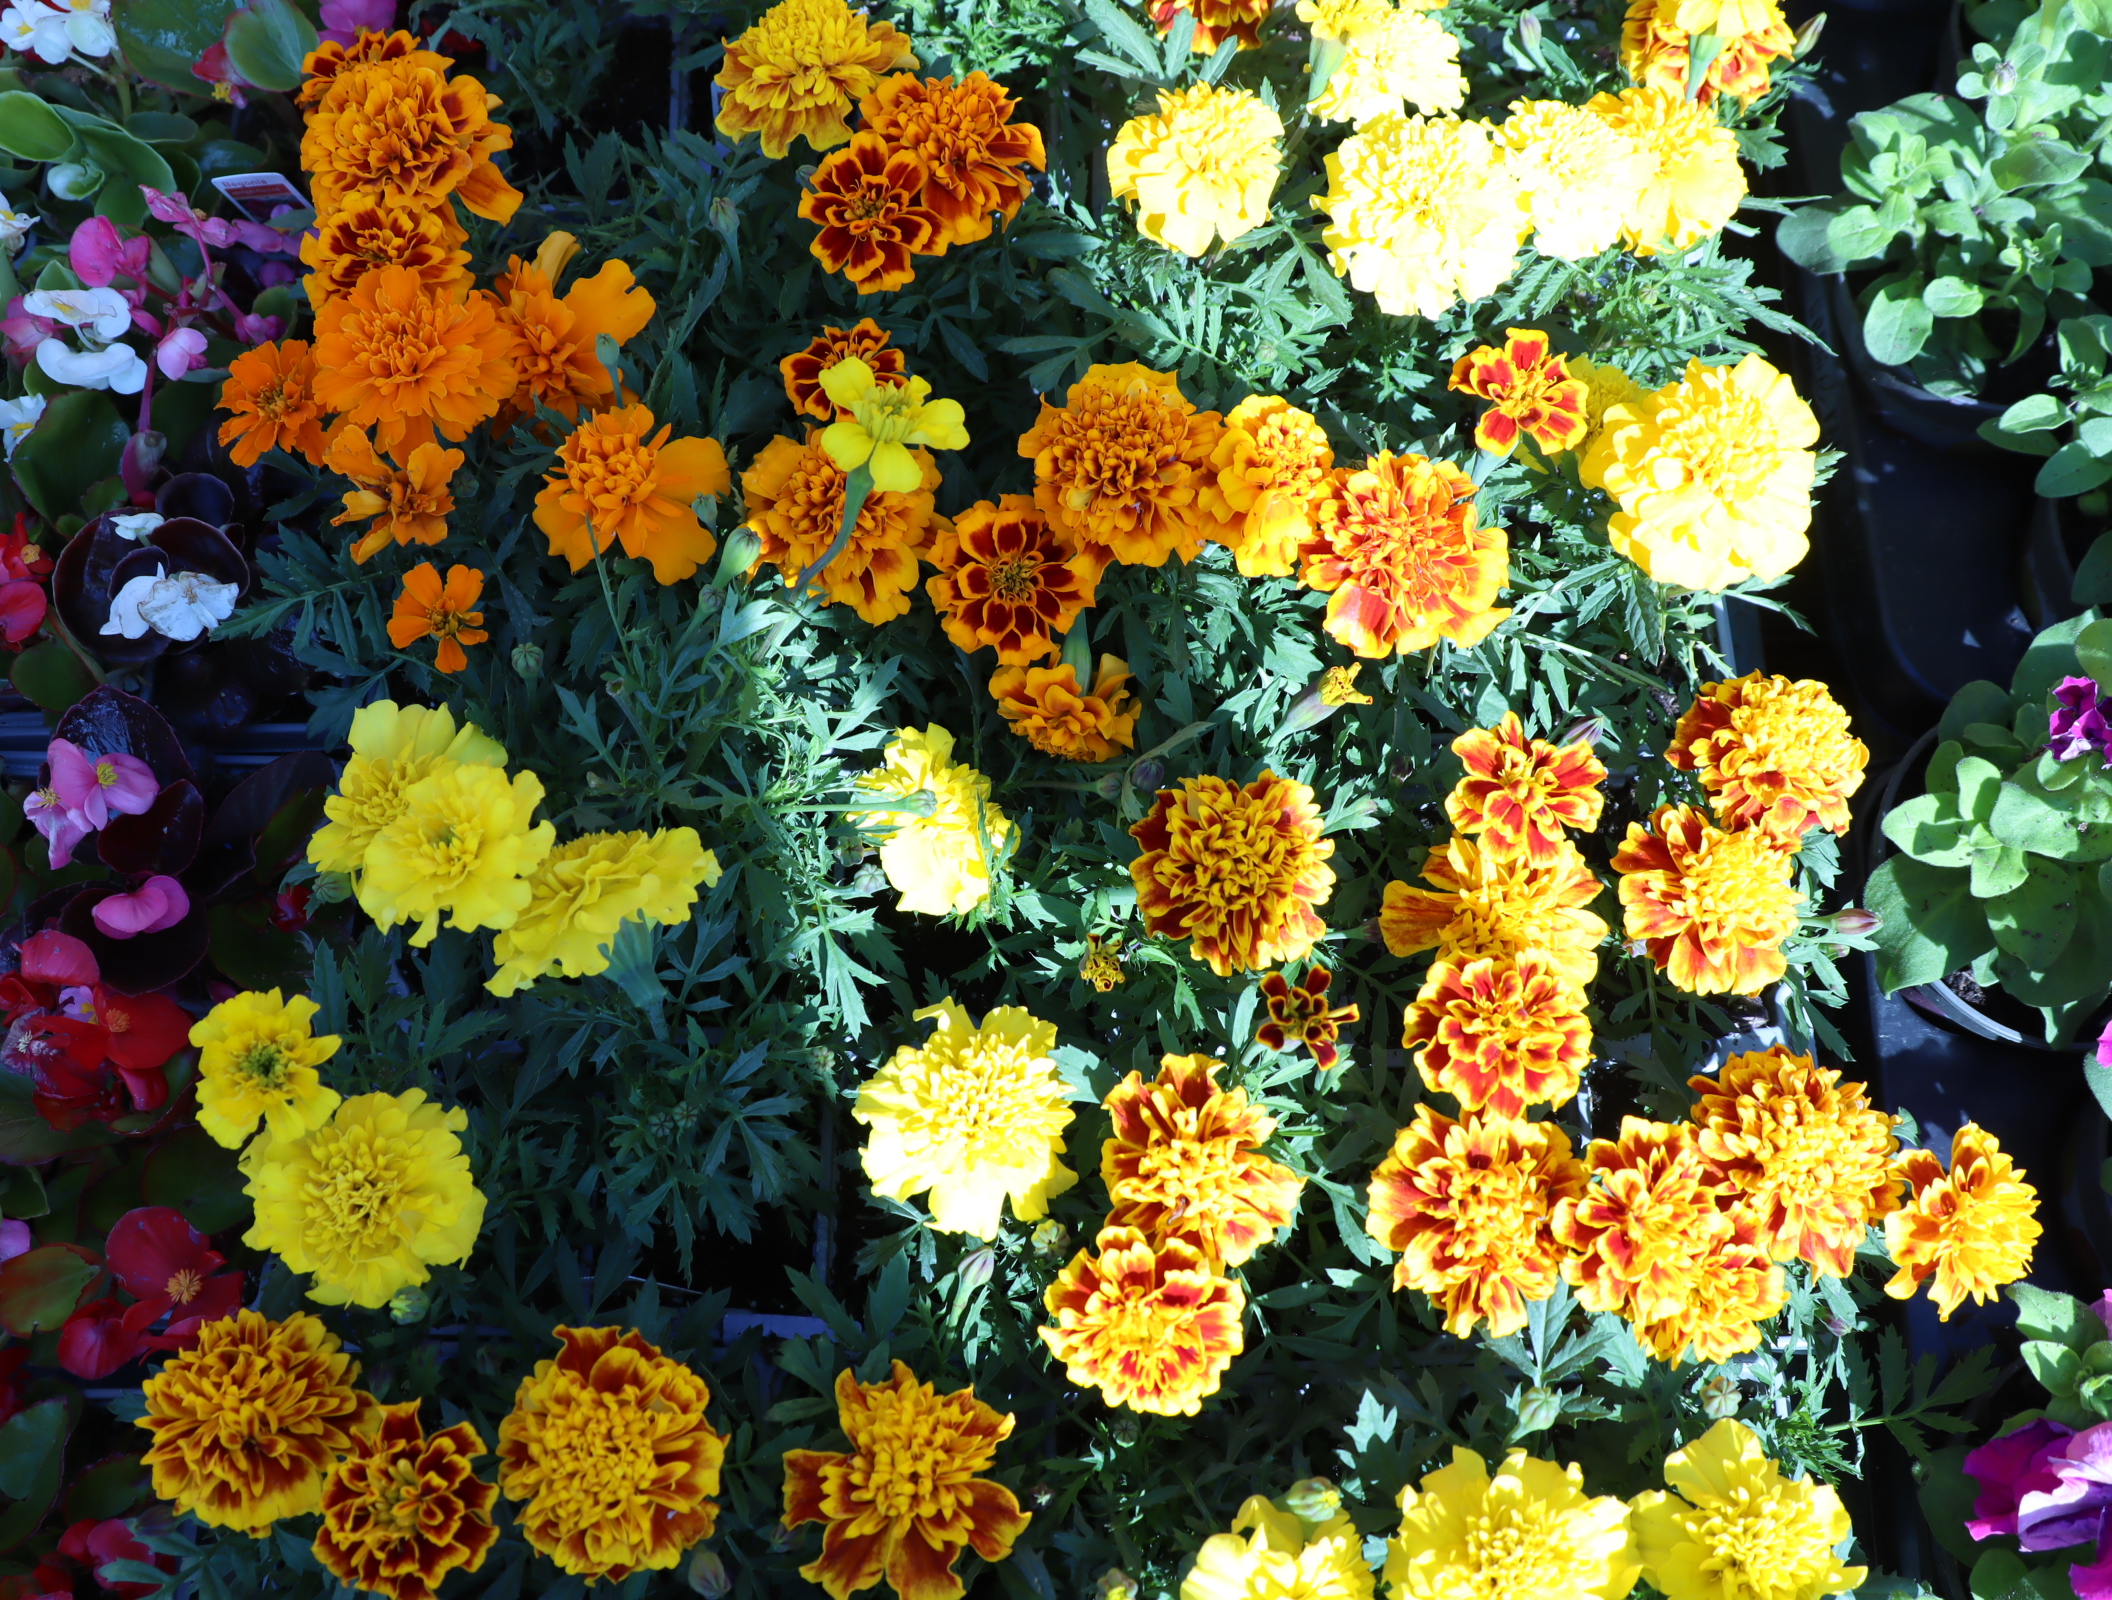 4 trays of African marigolds